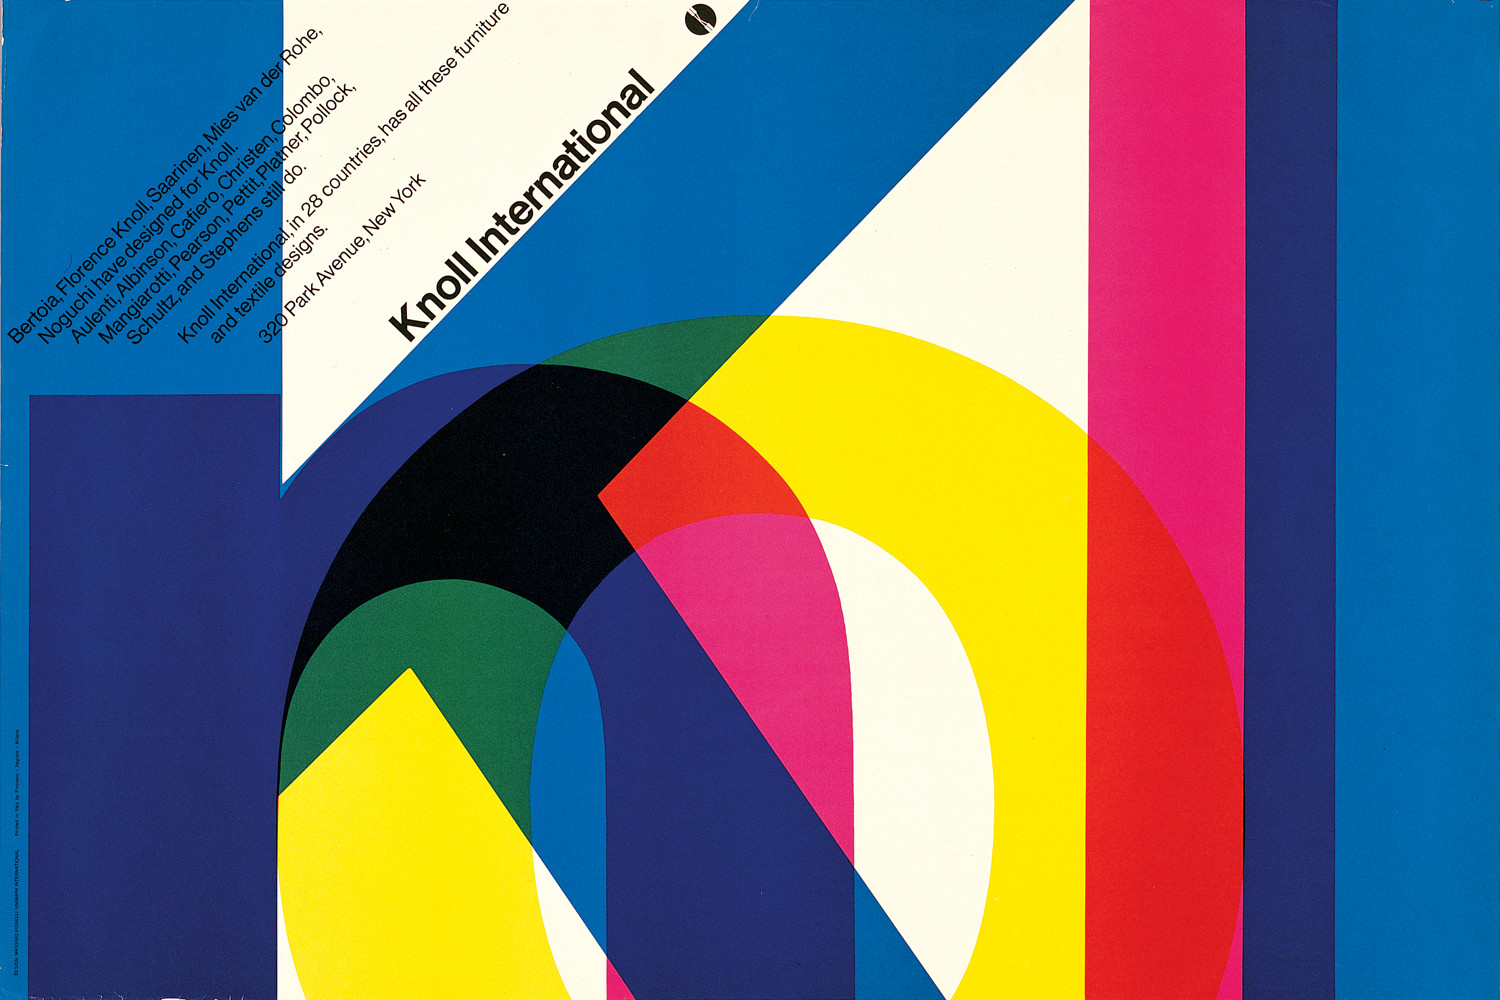 Ad for Knoll International from 1966. Each character on the word Knoll is in a different primary colour and they are multiplied over each other to create a colour mixing effect.